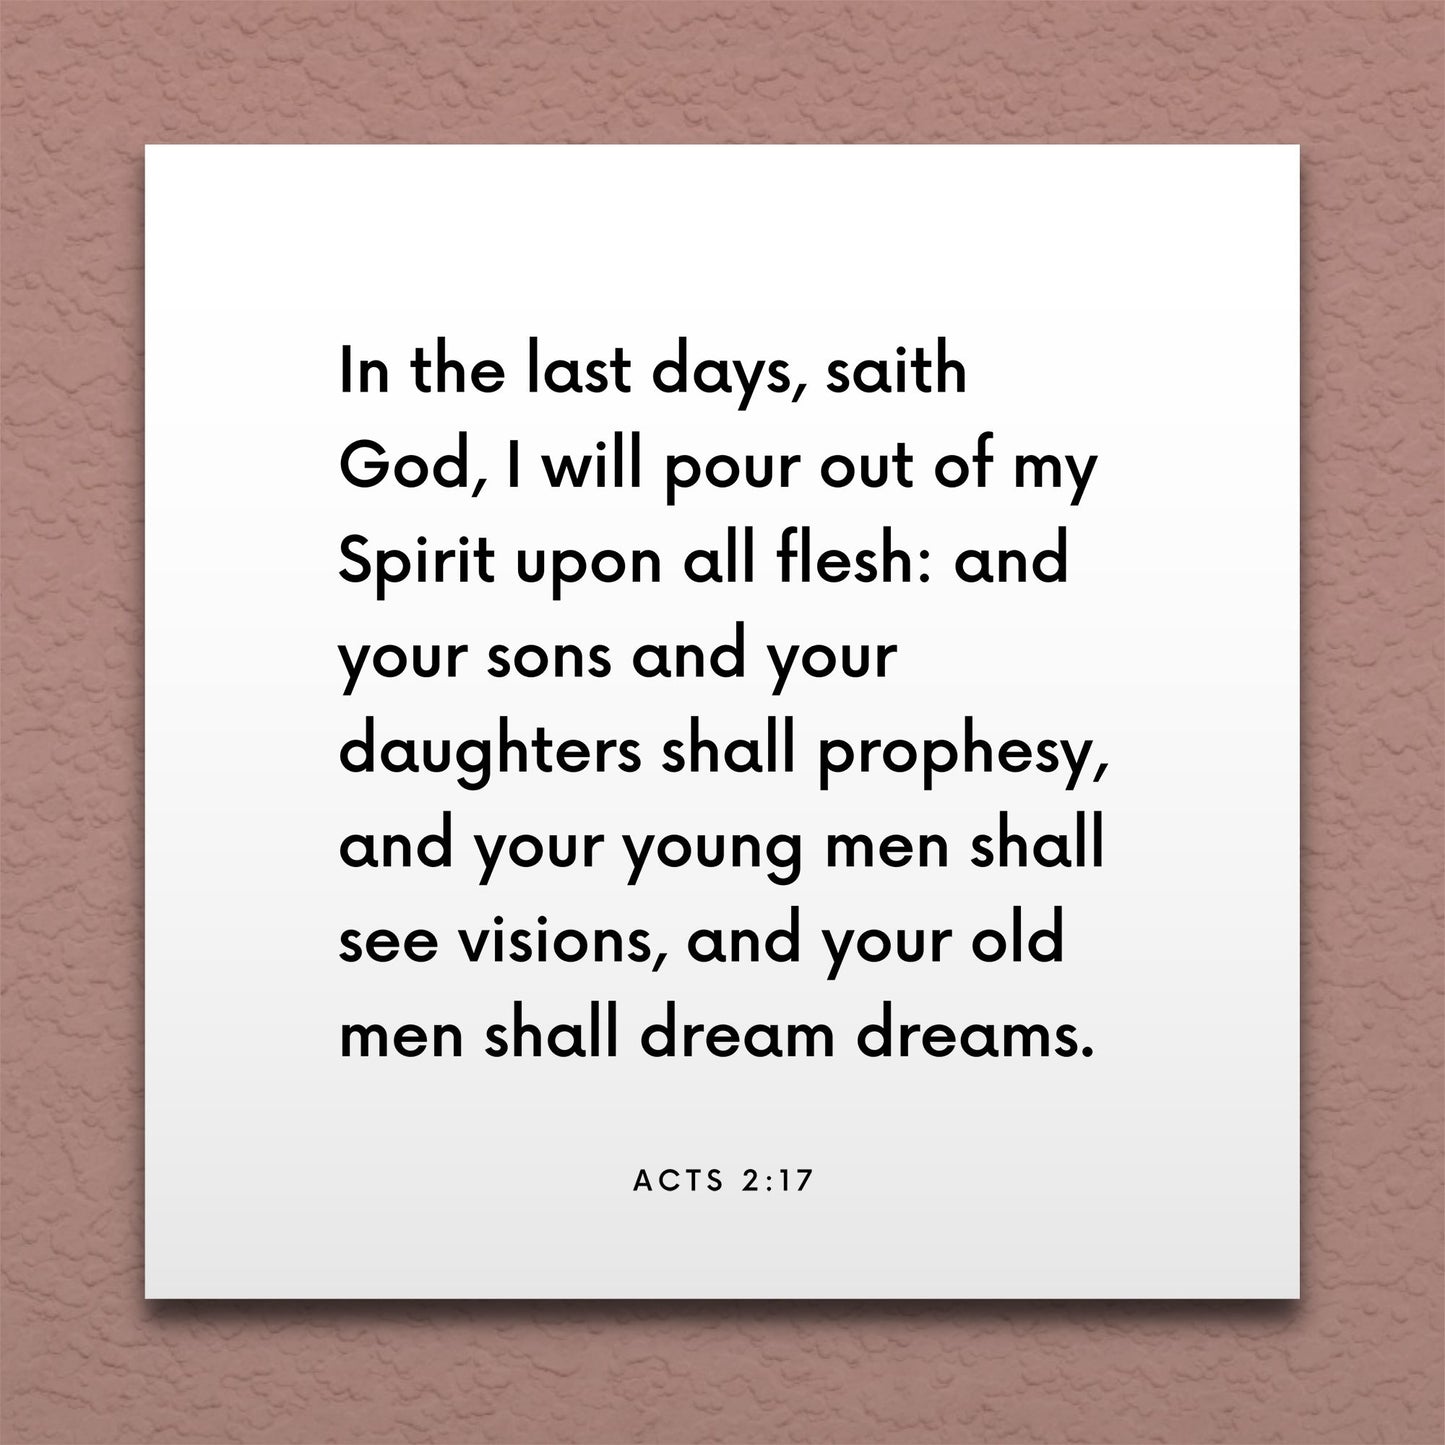 Wall-mounted scripture tile for Acts 2:17 - "In the last days, I will pour out my spirit upon all flesh"